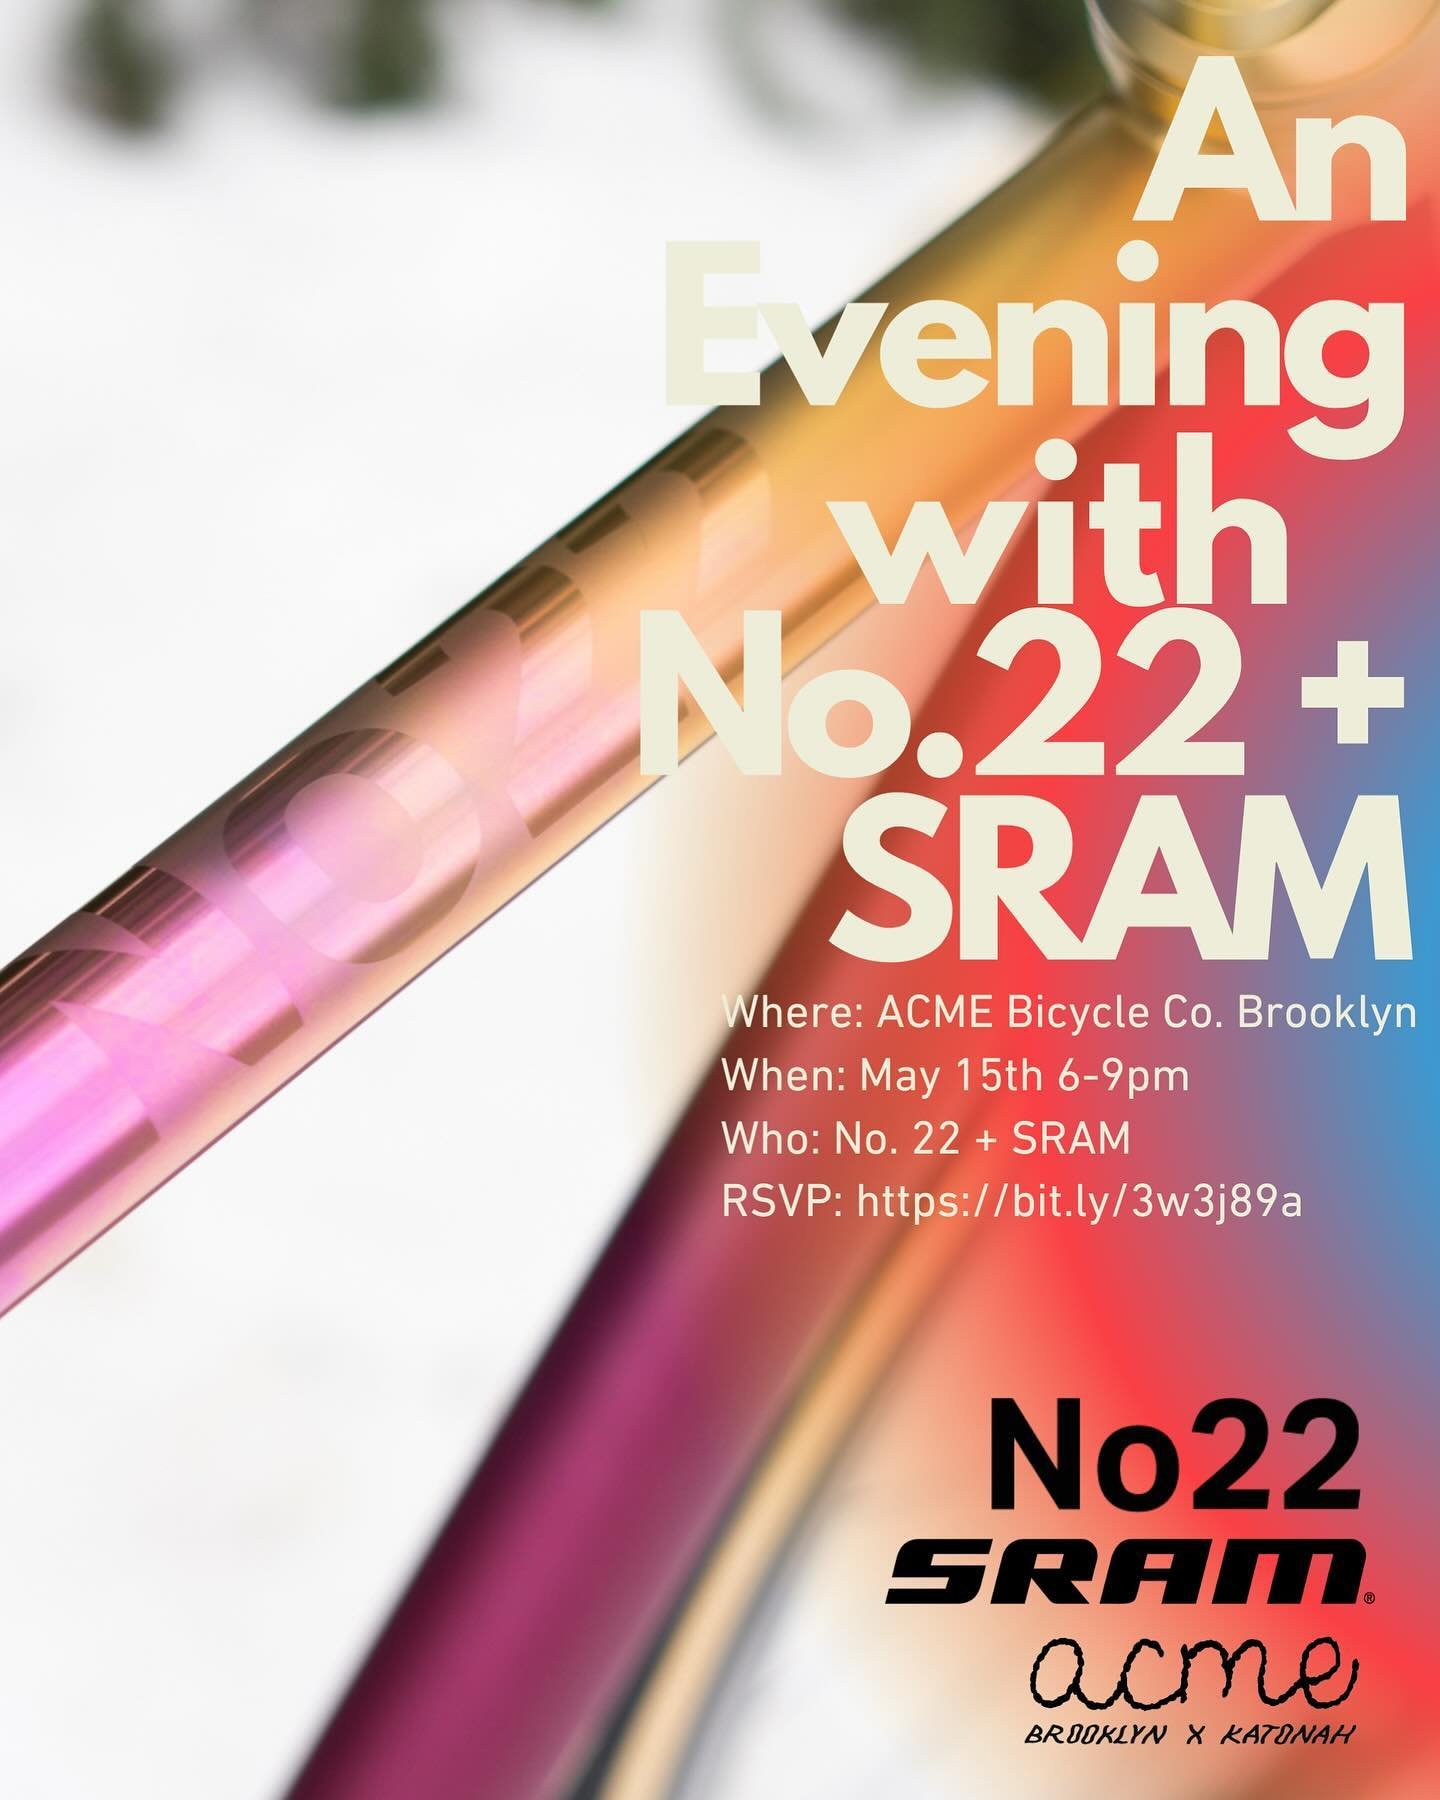 An evening with @22bikes and @sramroad at ACME Brooklyn. May 15th. 6-9pm. RSVP link in bio. Music by @dj_mkl + @gokiryunyc.